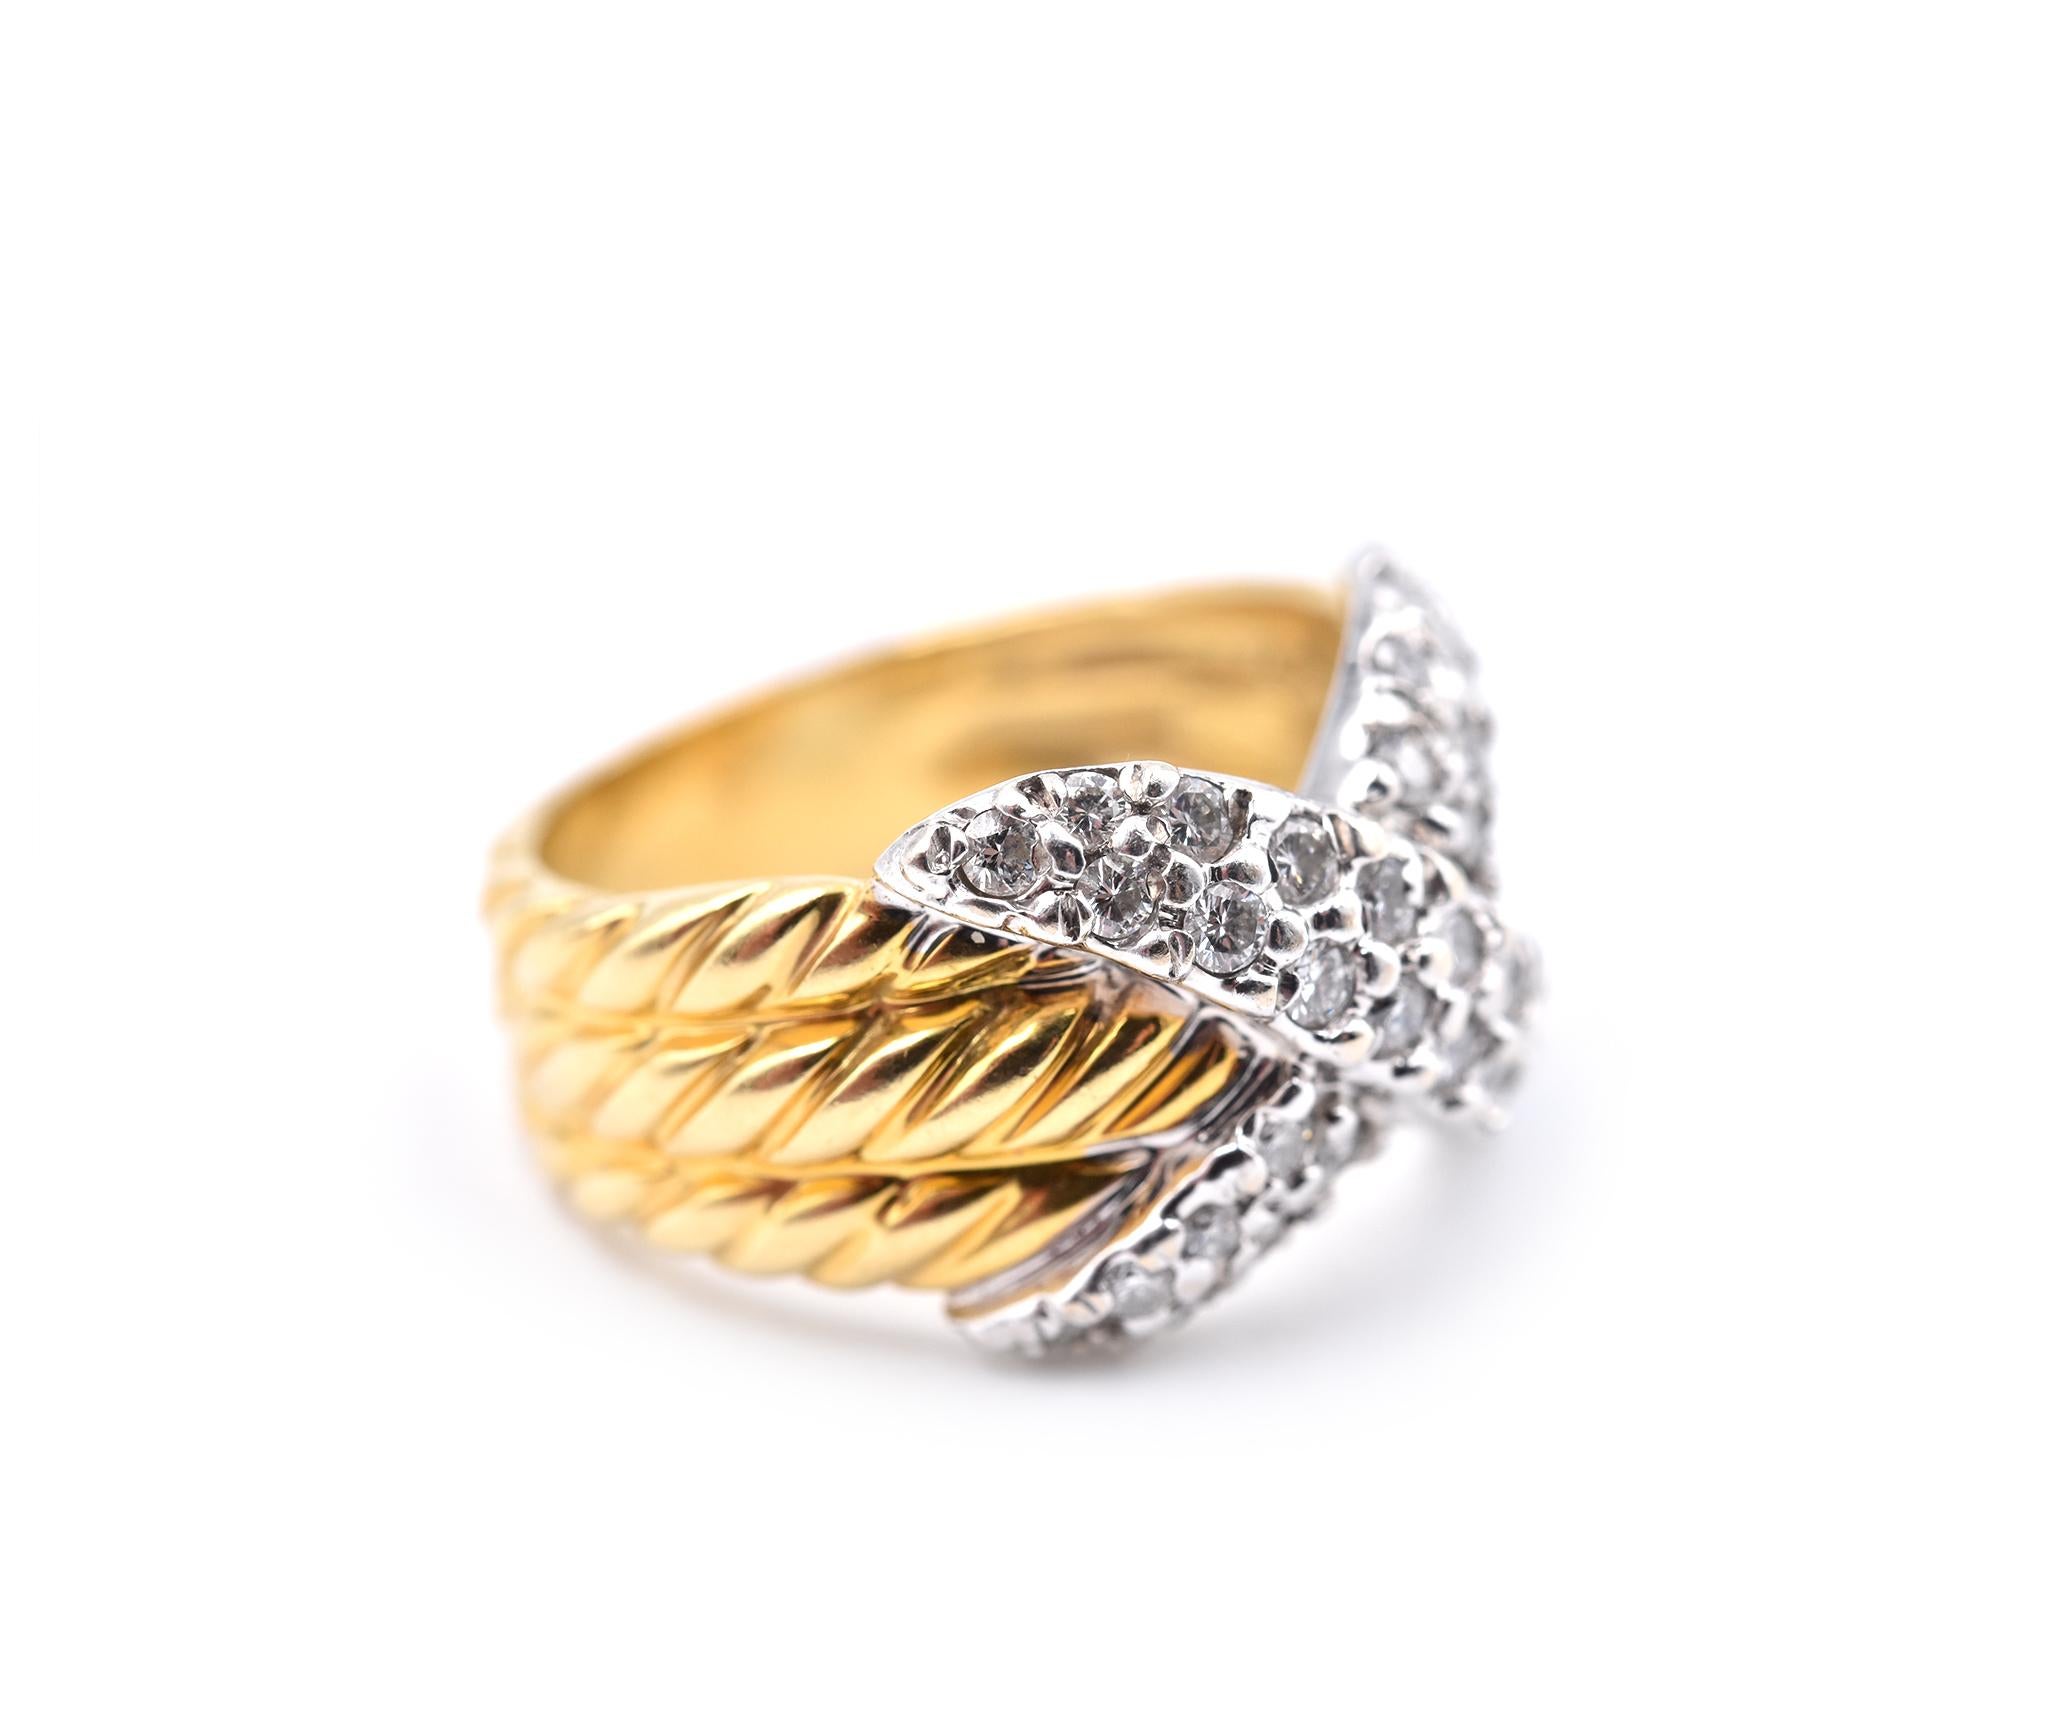 Designer: David Yurman
Material: 18k white and yellow gold
Diamonds: 26 round brilliant diamonds= .26cttw
Color: G
Clarity: VS
Size: 6 ¾ (please allow two additional shipping days for sizing requests)
Dimensions: ring is 12.36mm wide
Weight: 9.6